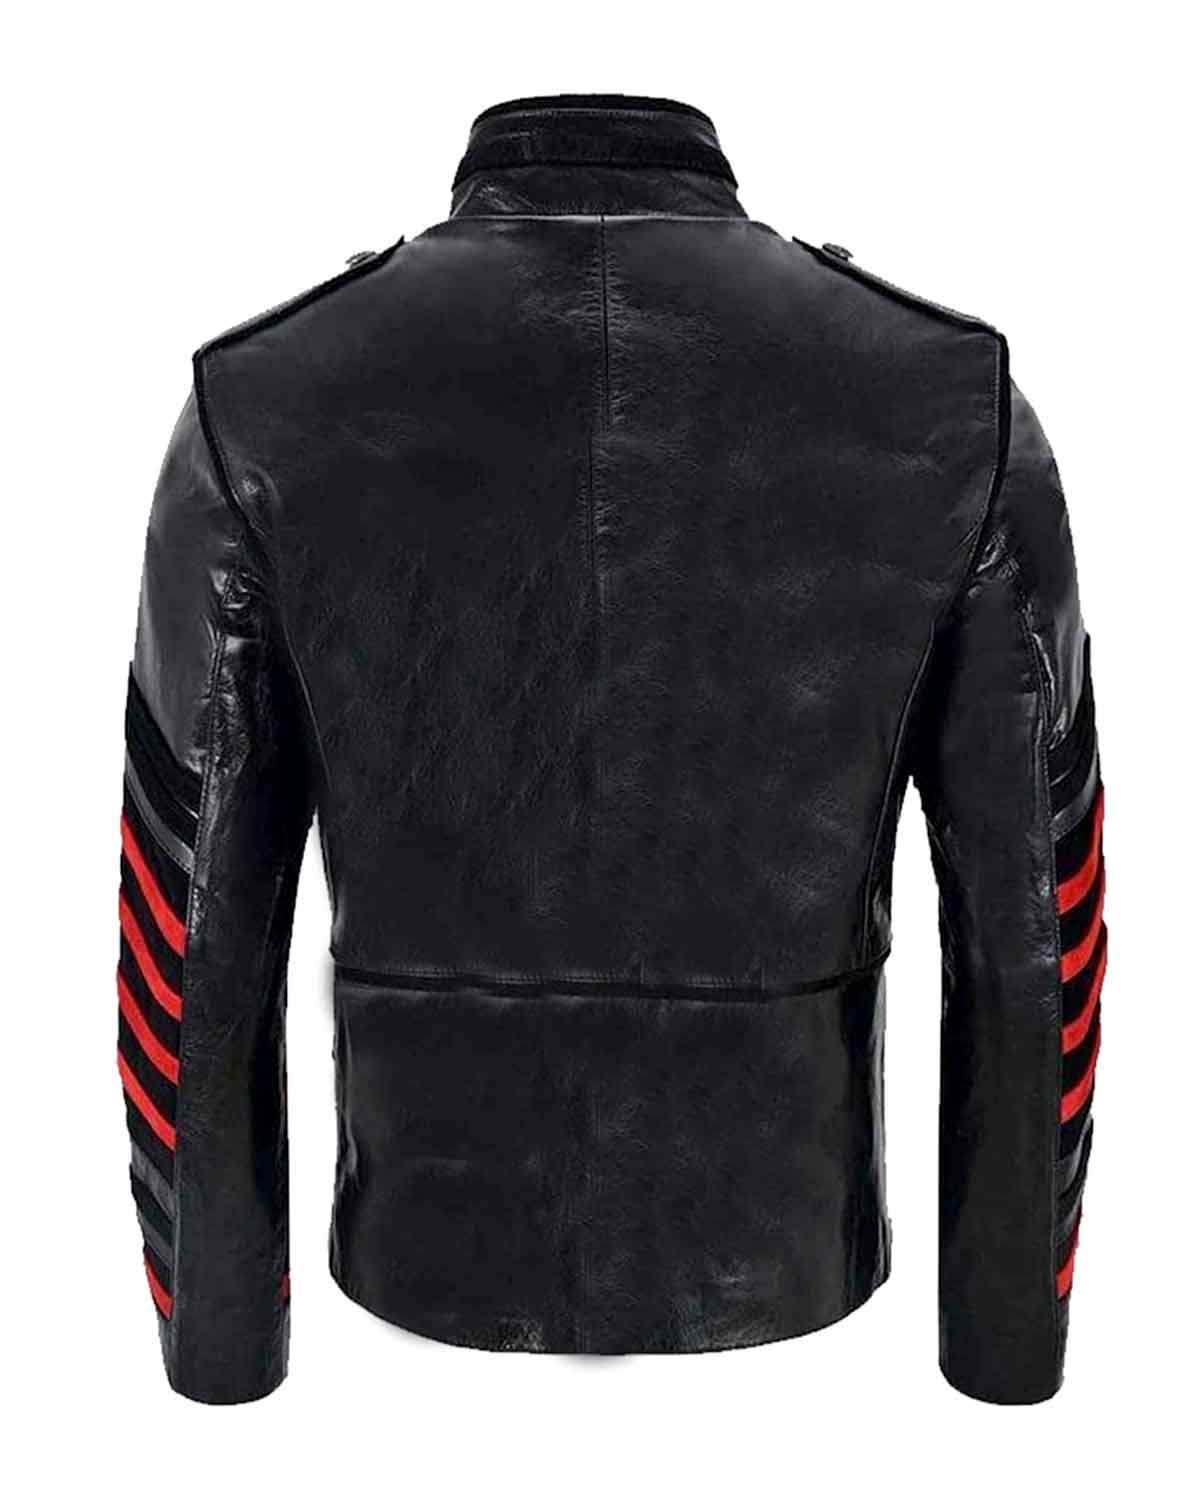 Mens Black Military Style Real Leather Biker Jacket 